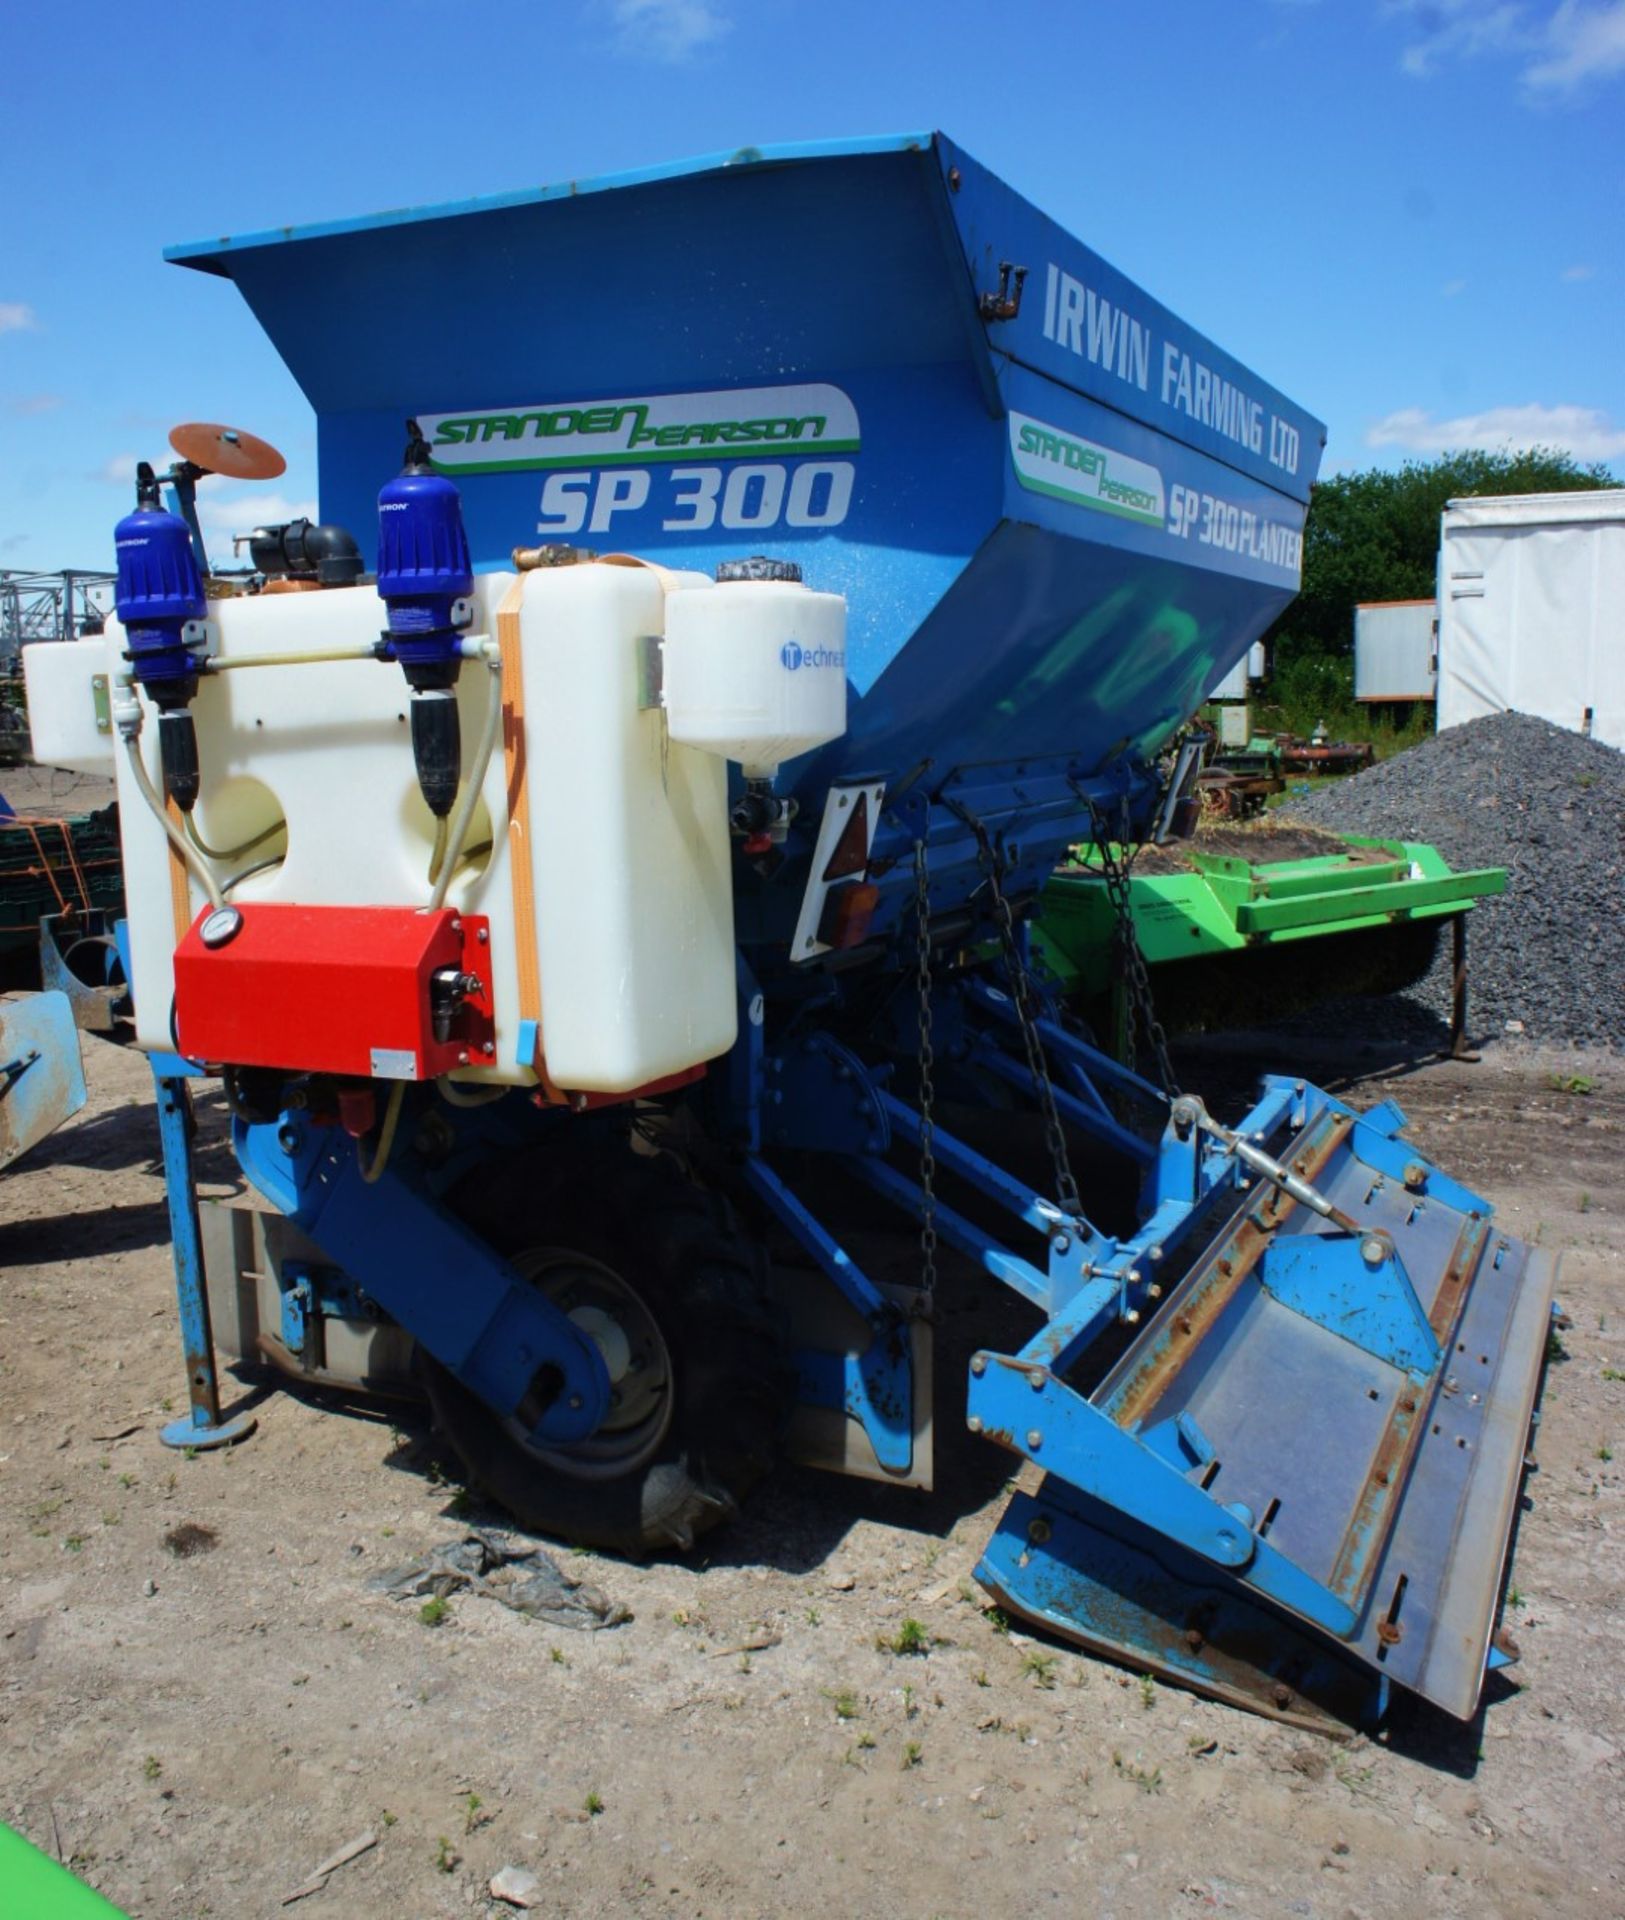 Standen Pearson BB3 (SP300), 3 Row Potato Planter, Serial Number 678, Year 2012 - Image 2 of 8